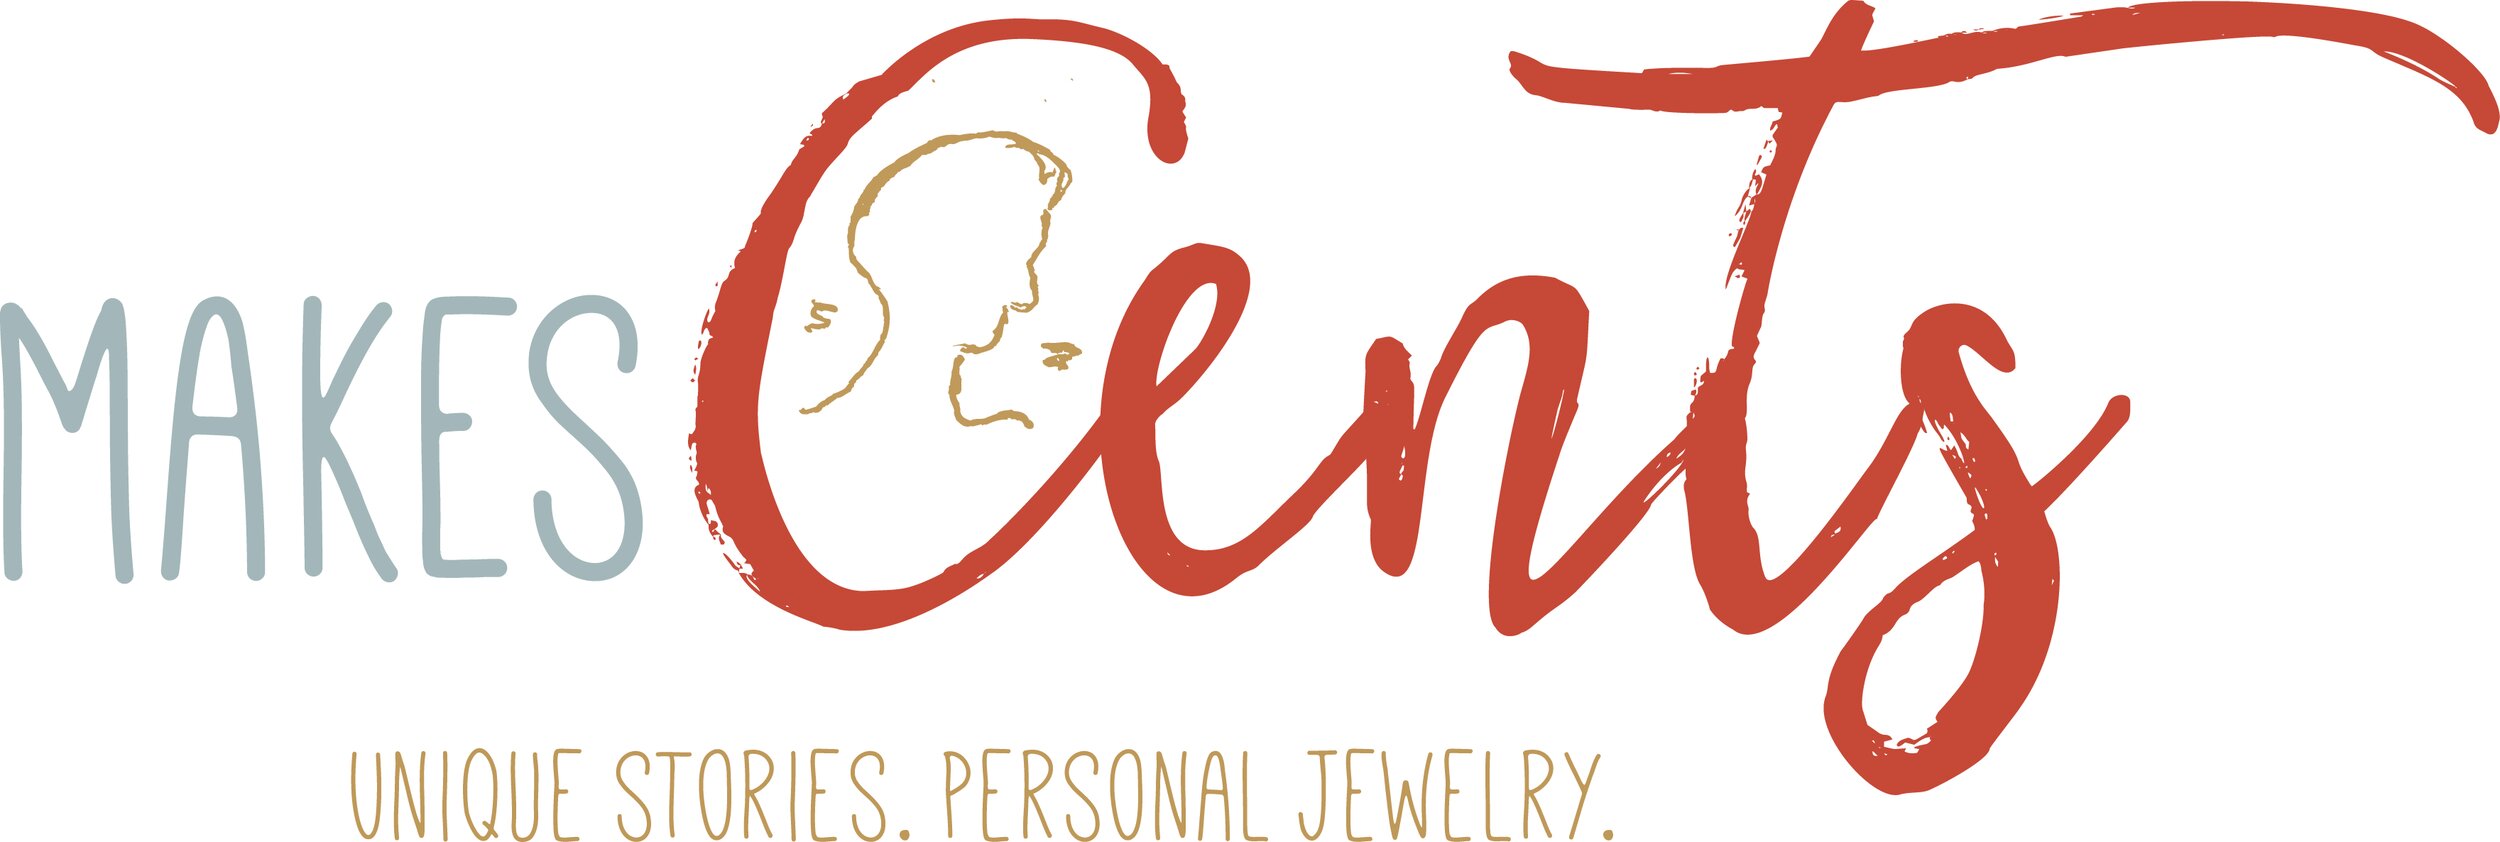 Makes Cents Jewelry